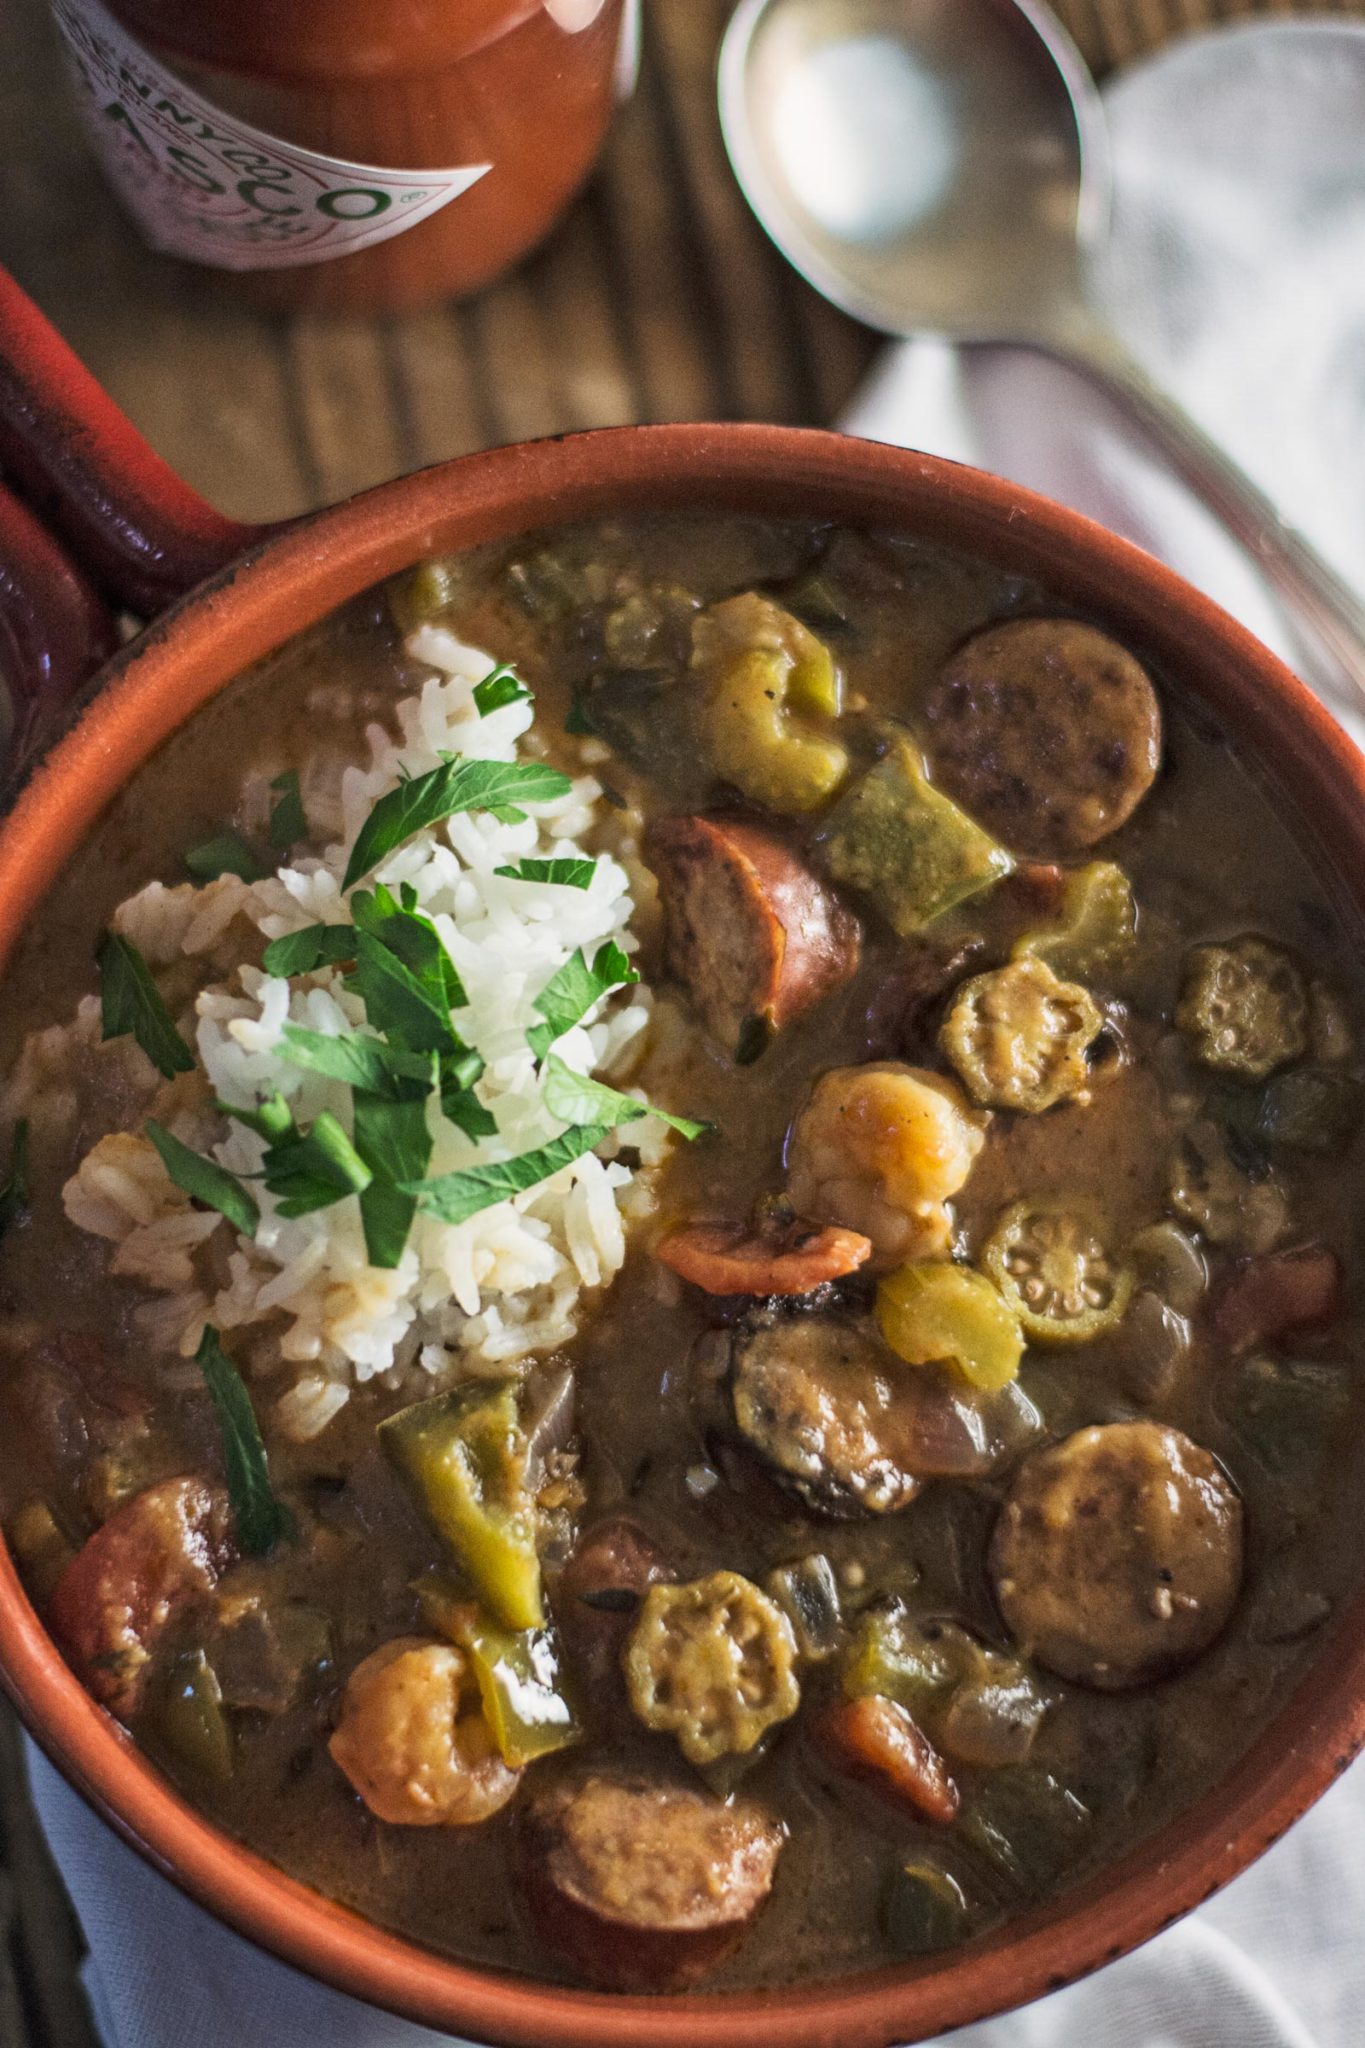 Try this smokey flavored New Orleans classic, Sausage & Shrimp Gumbo! Recipe @LittleFiggyFood